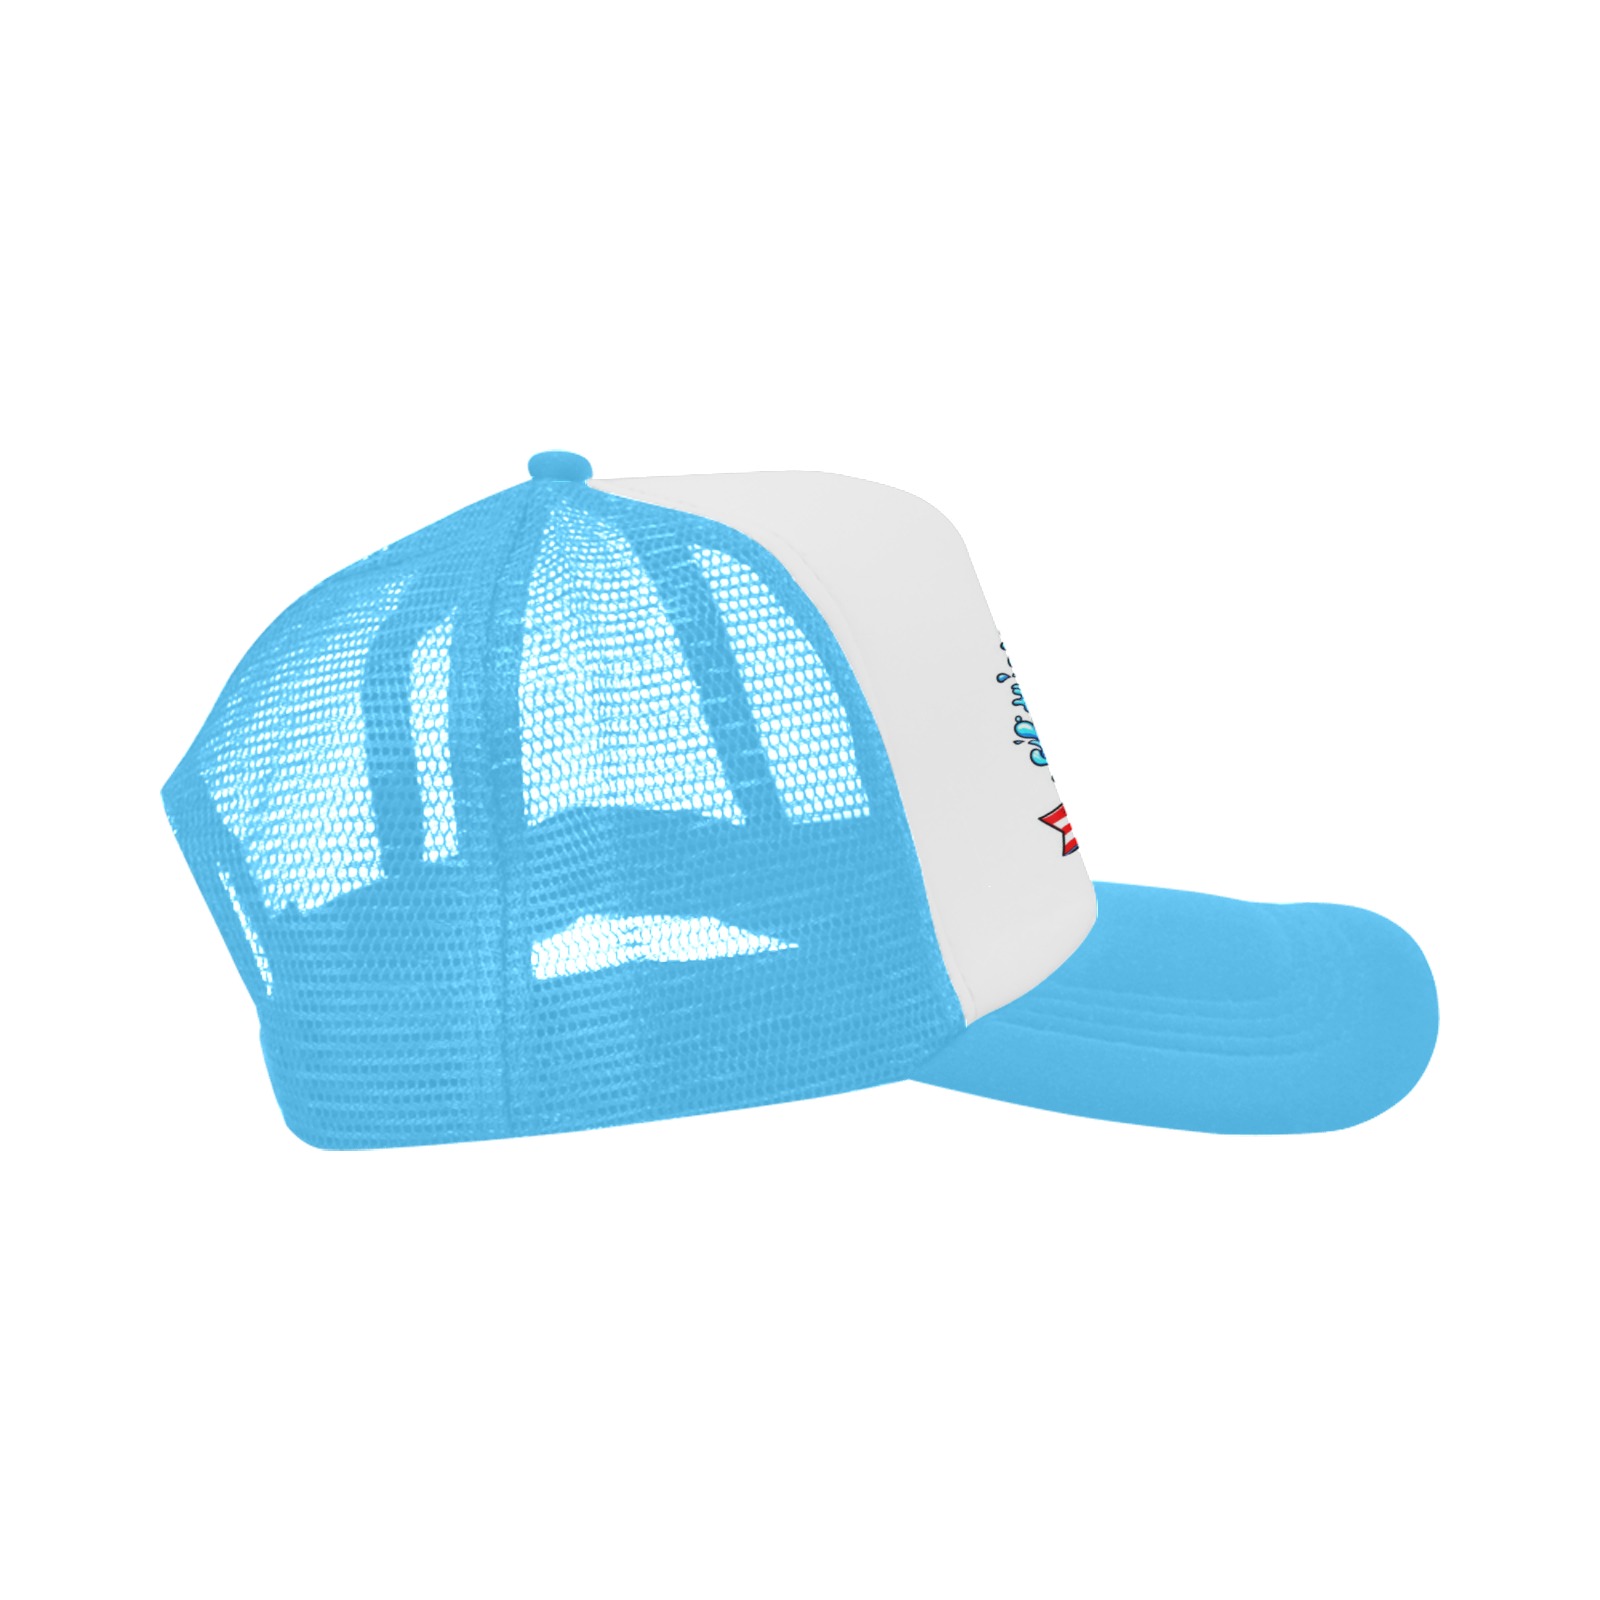 CAPE COD-GREAT WHITE EATING HOT DOG Trucker Hat